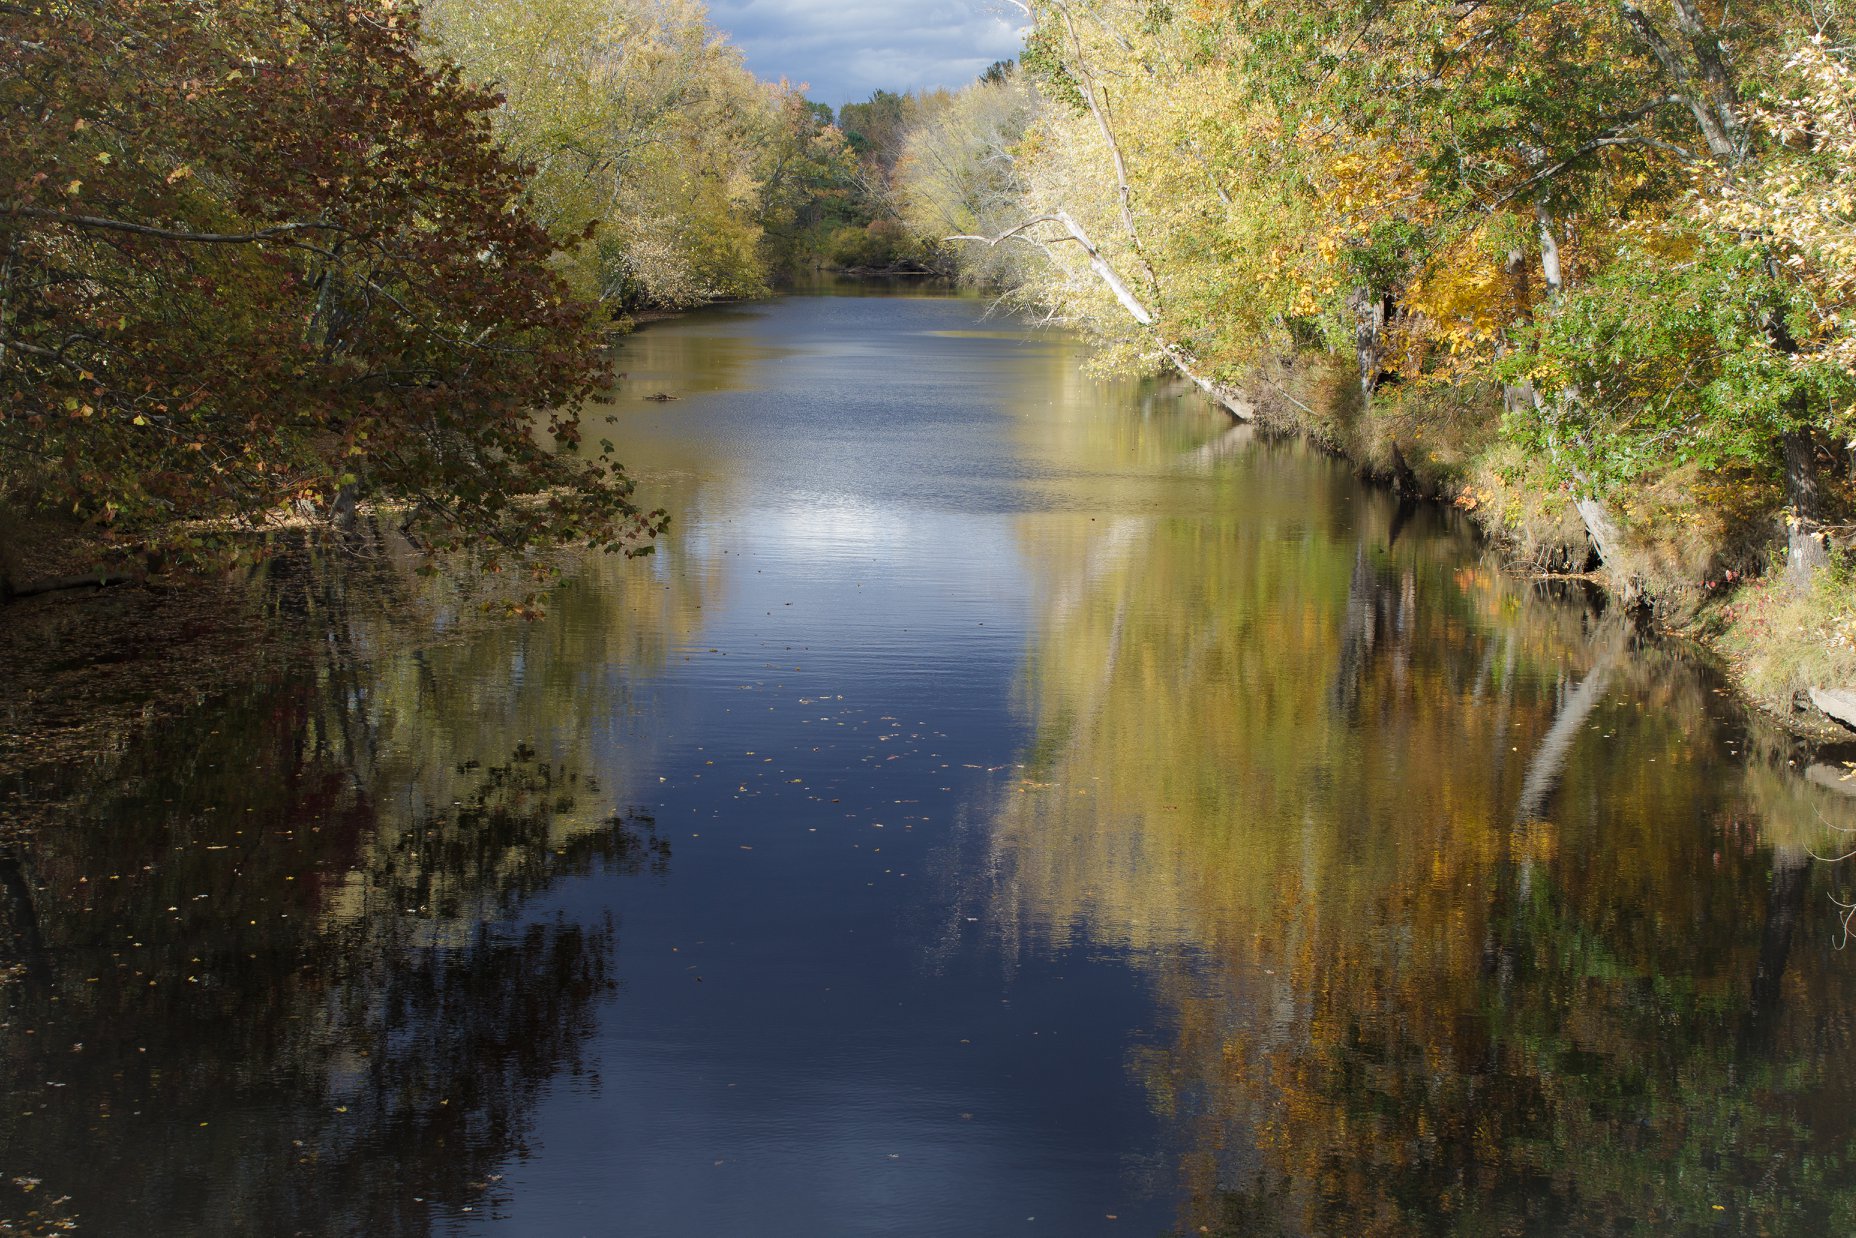 Nashua River downstream with trees leaning over the water.